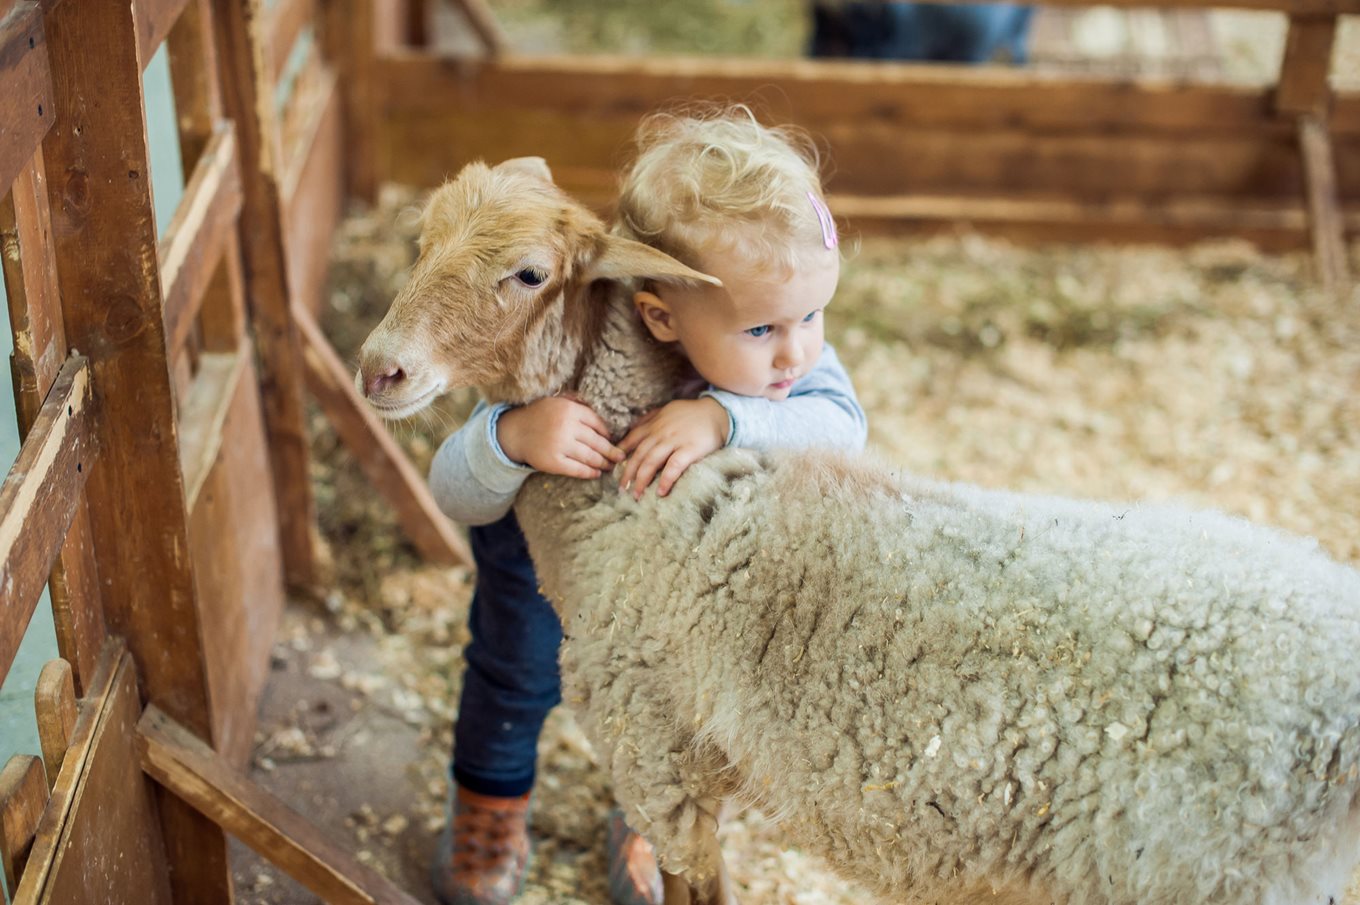 Meeting the animals at a petting farm | safefood education